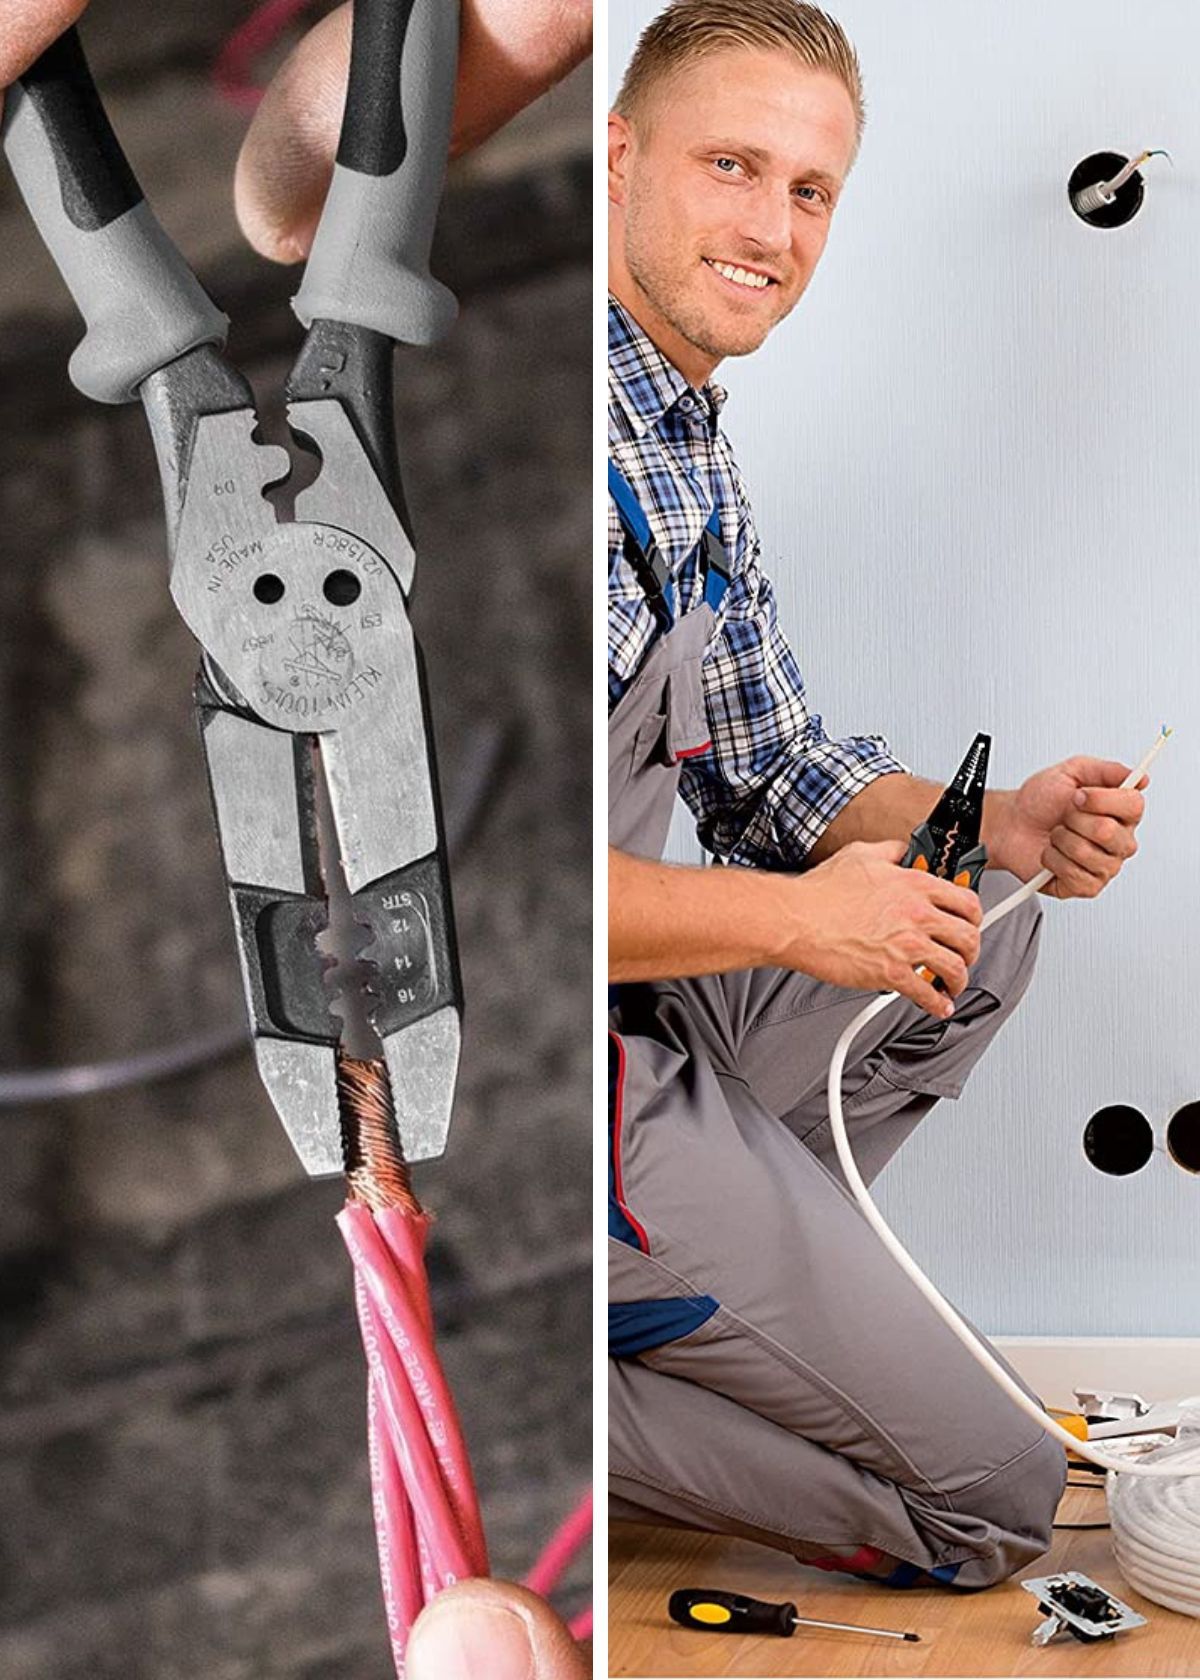 Electrify Your Toolbox With These 5 Electric Pliers For Every DIYer!